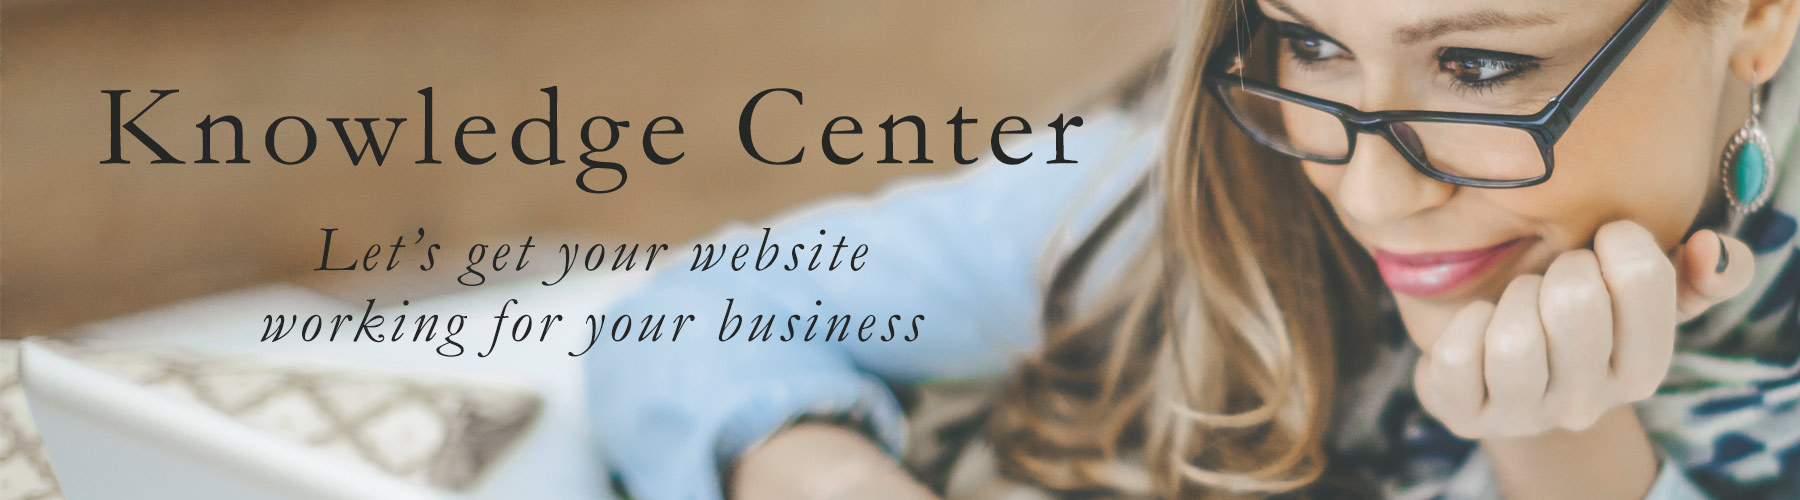 Knowledge Center - Let's get your website working for your business.